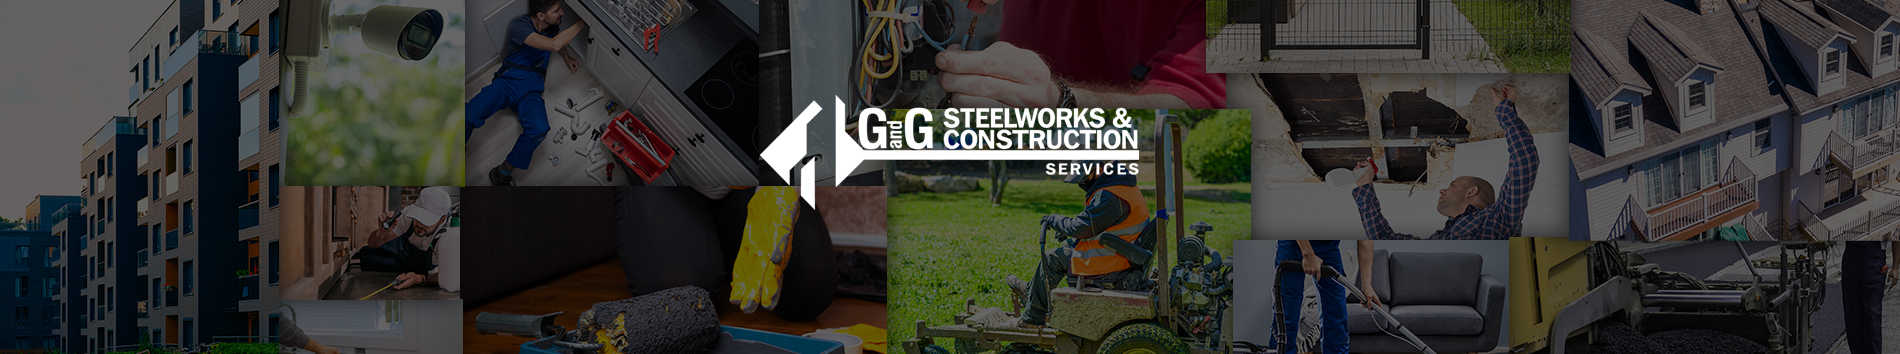 G and G Steelworks & Construction Services